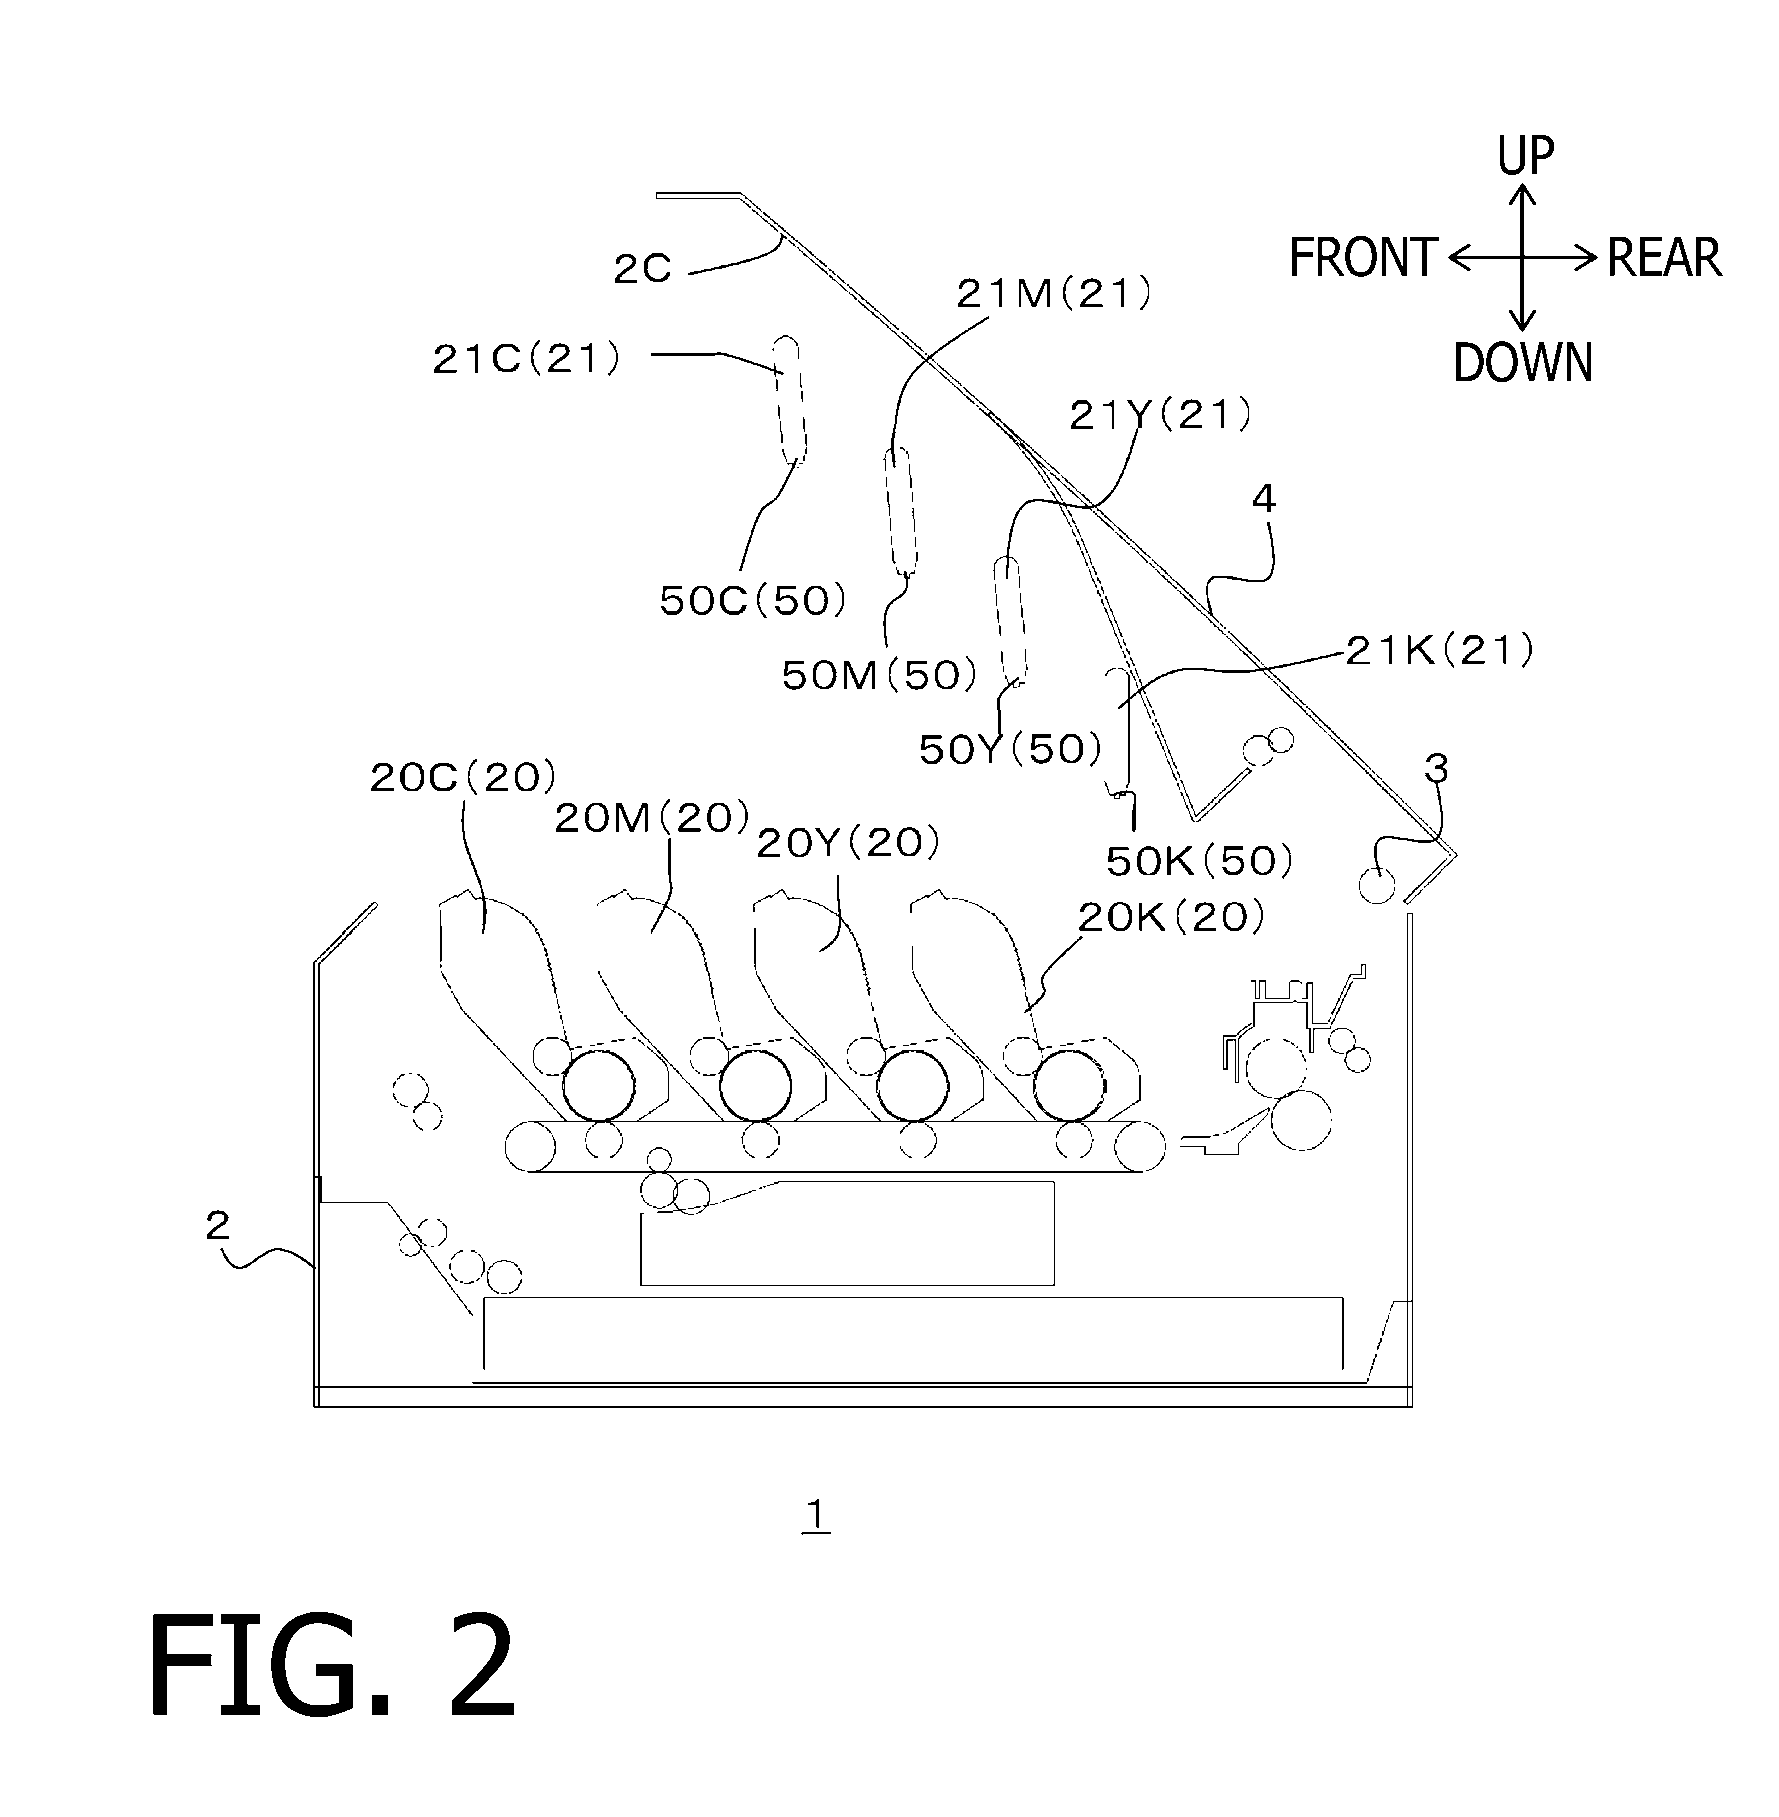 Image forming apparatus having LED head and rotatable cover